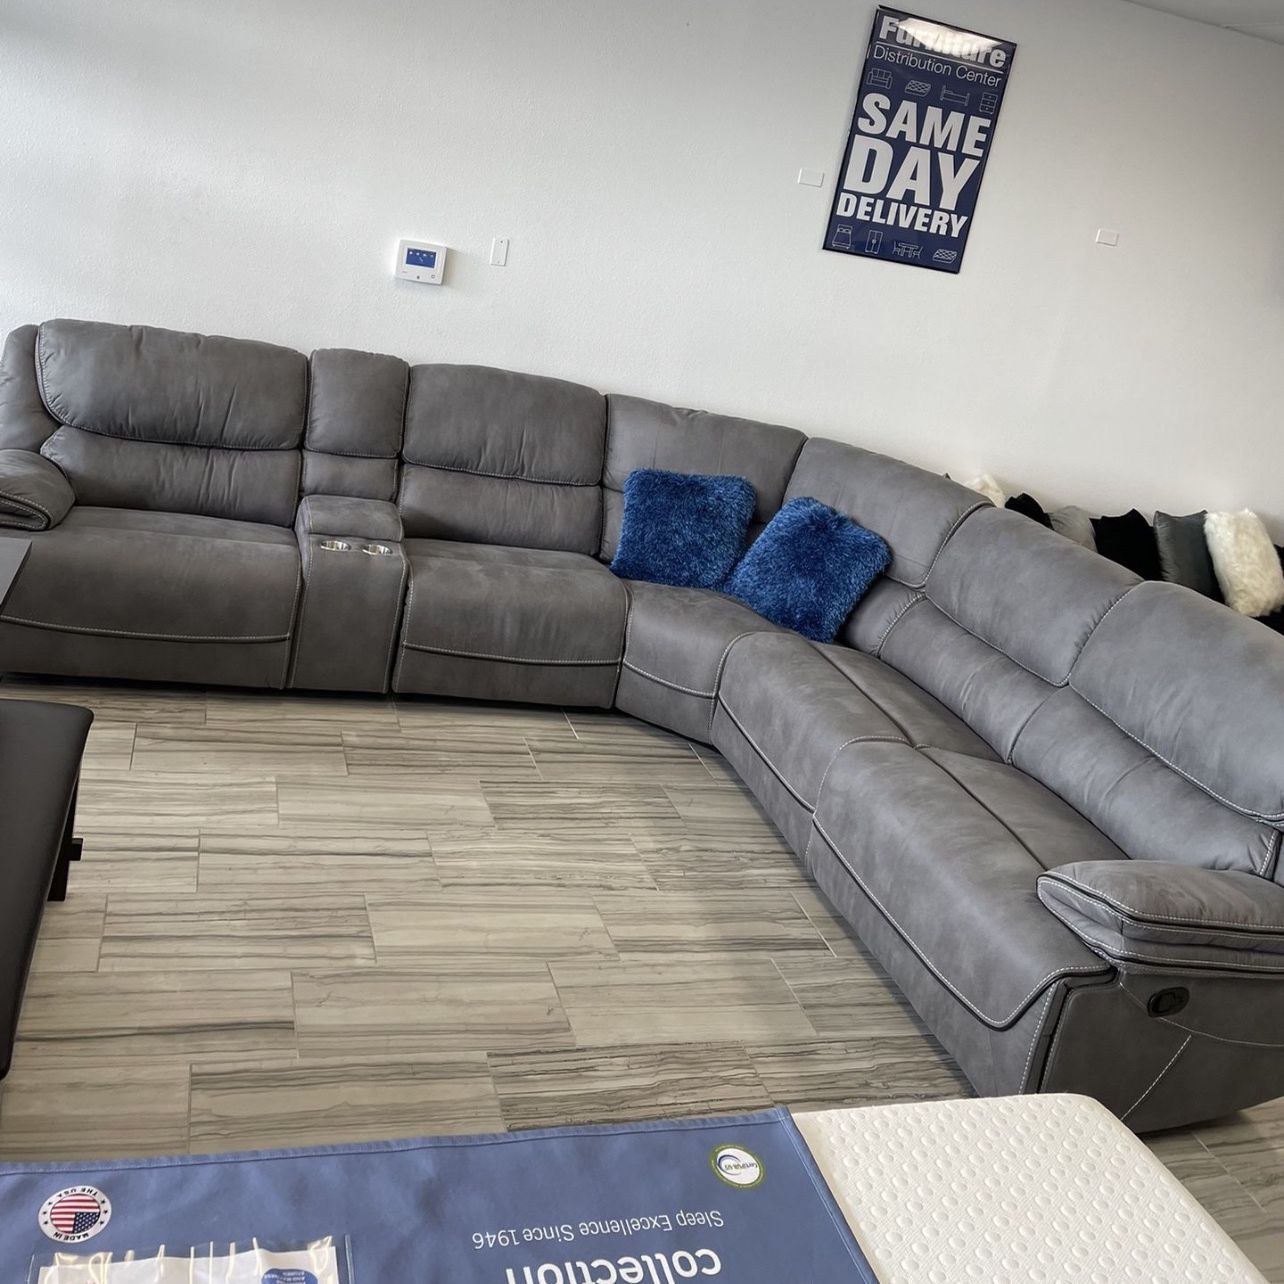 COMFY NEW ALEJANDRA RECLINING SECTIONAL SOFA ON SALE ONLY $1499. IN STOCK SAME DAY DELIVERY 🚚 EASY FINANCING 